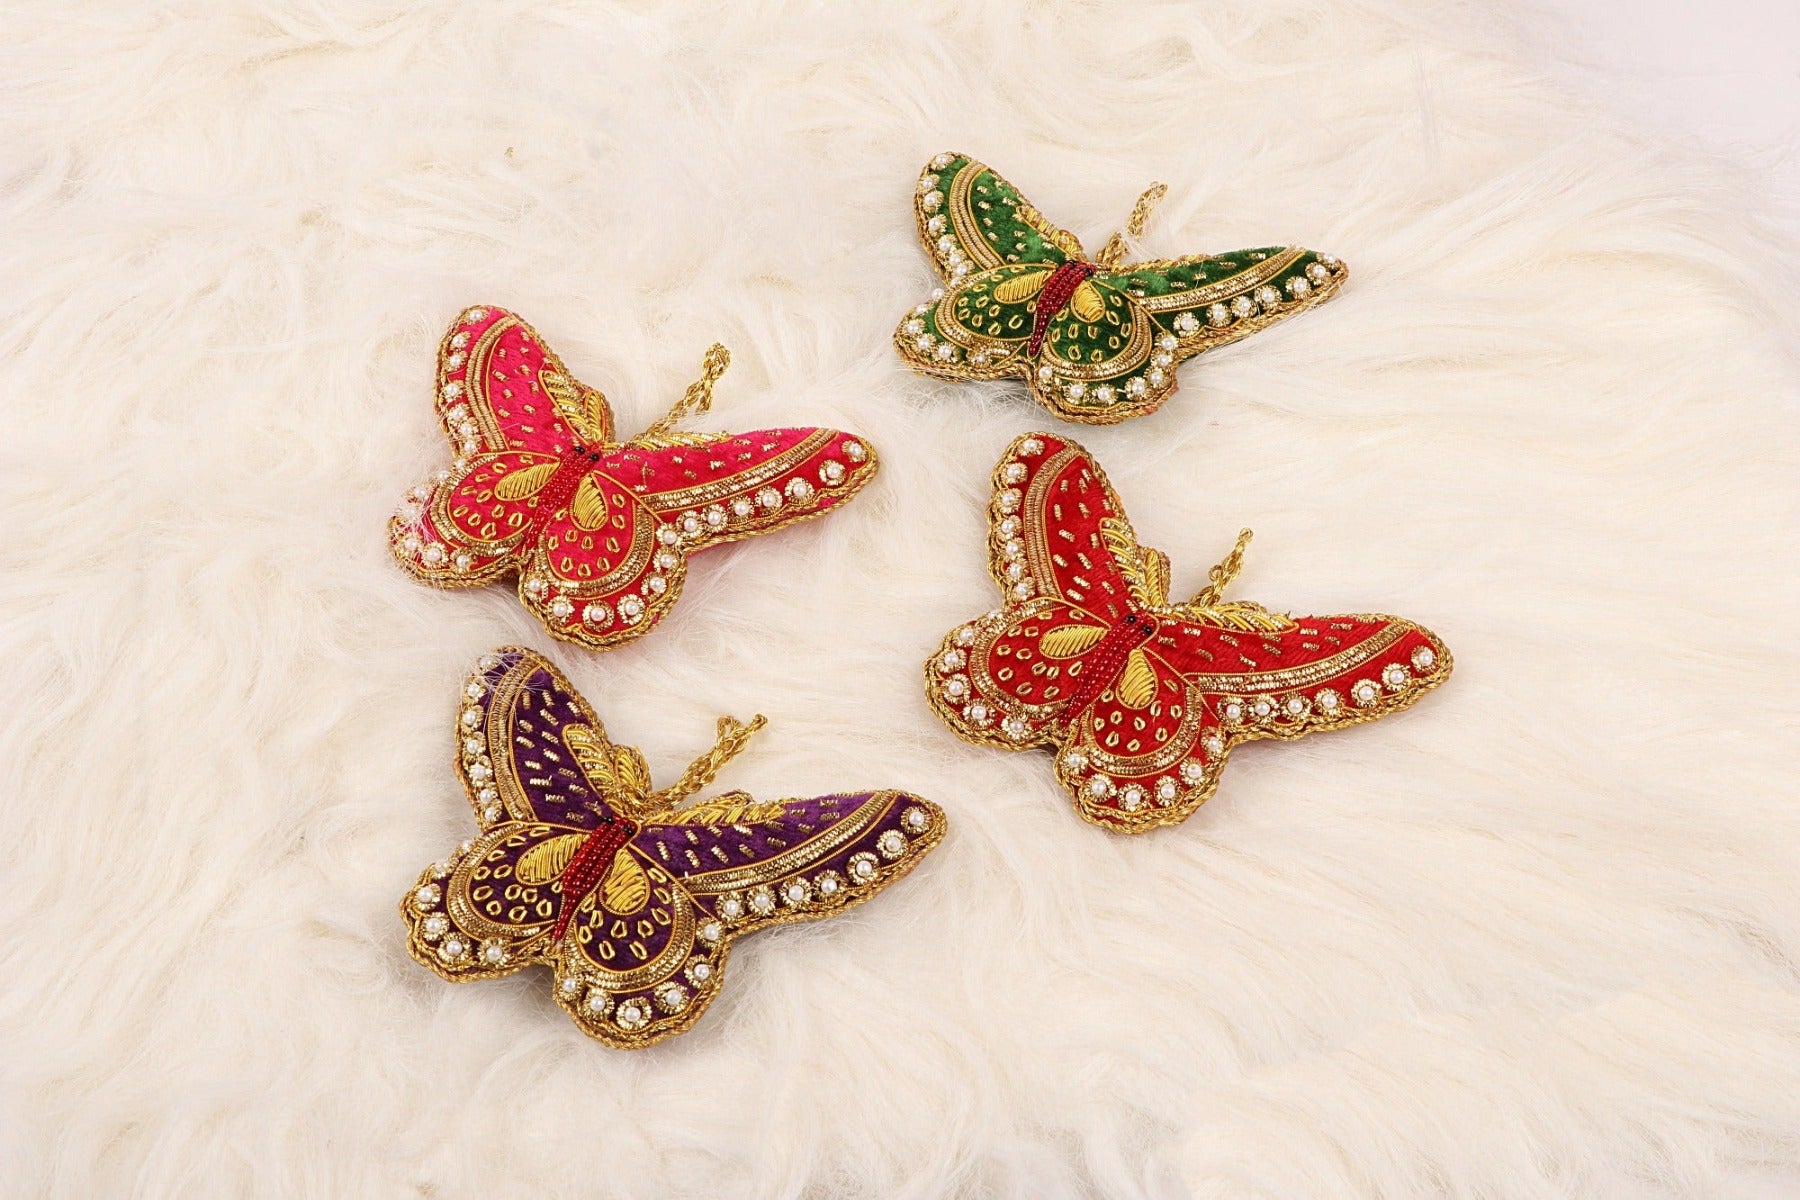 Butterfly Fantasy Christmas ornaments set of 4 pieces for holiday decor (1SET=4PC)